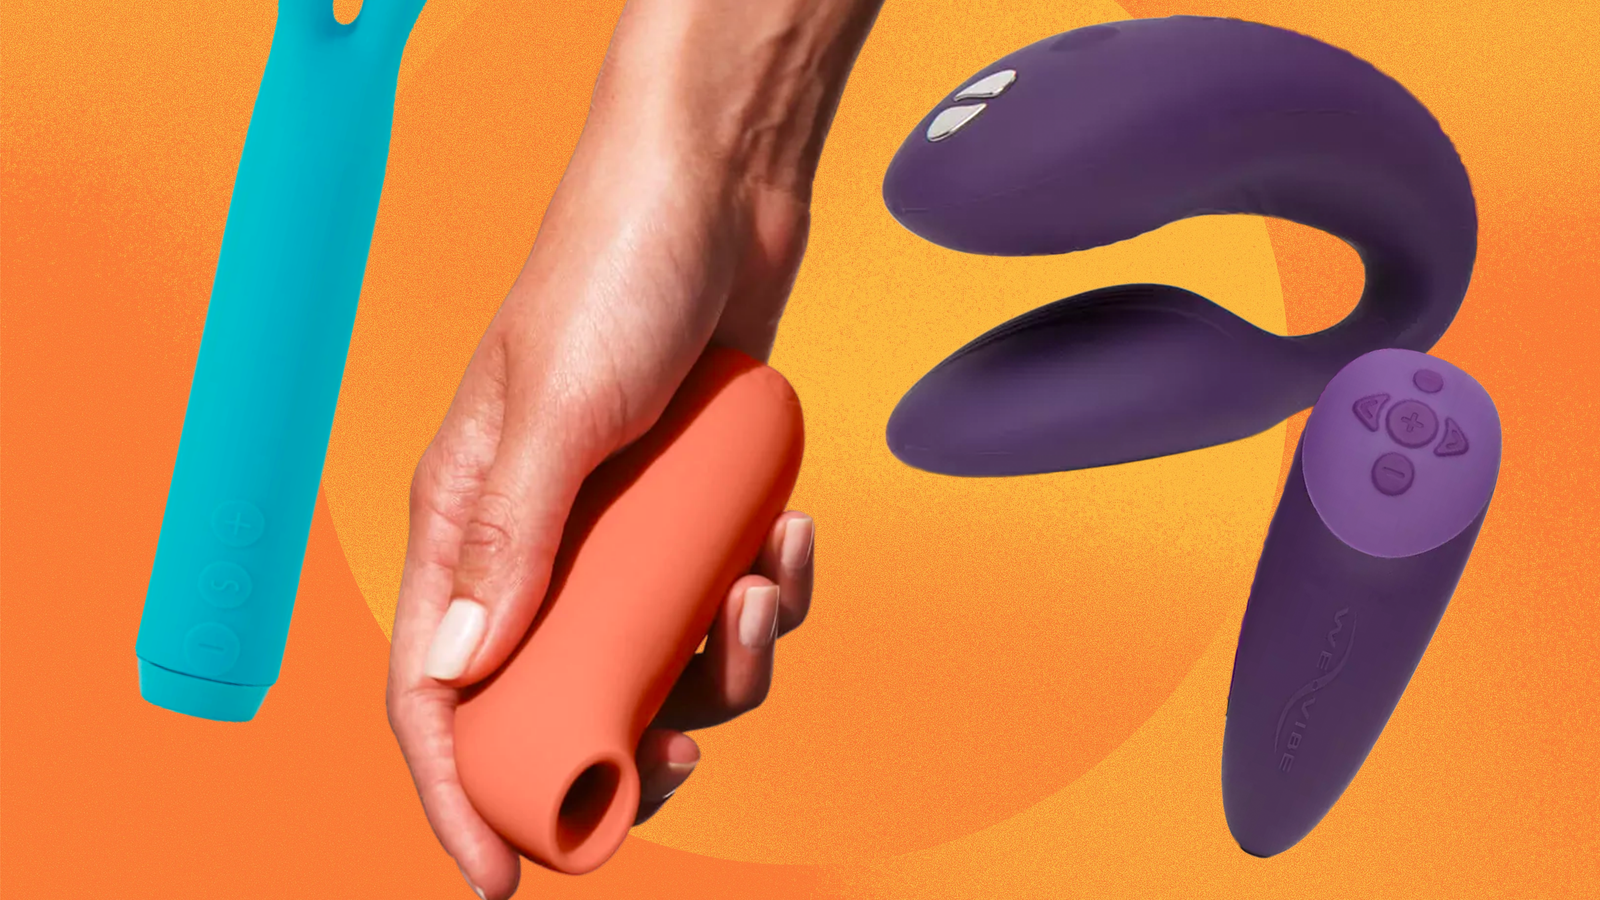 The 24 Best Sex Toys for Women, According to Experts